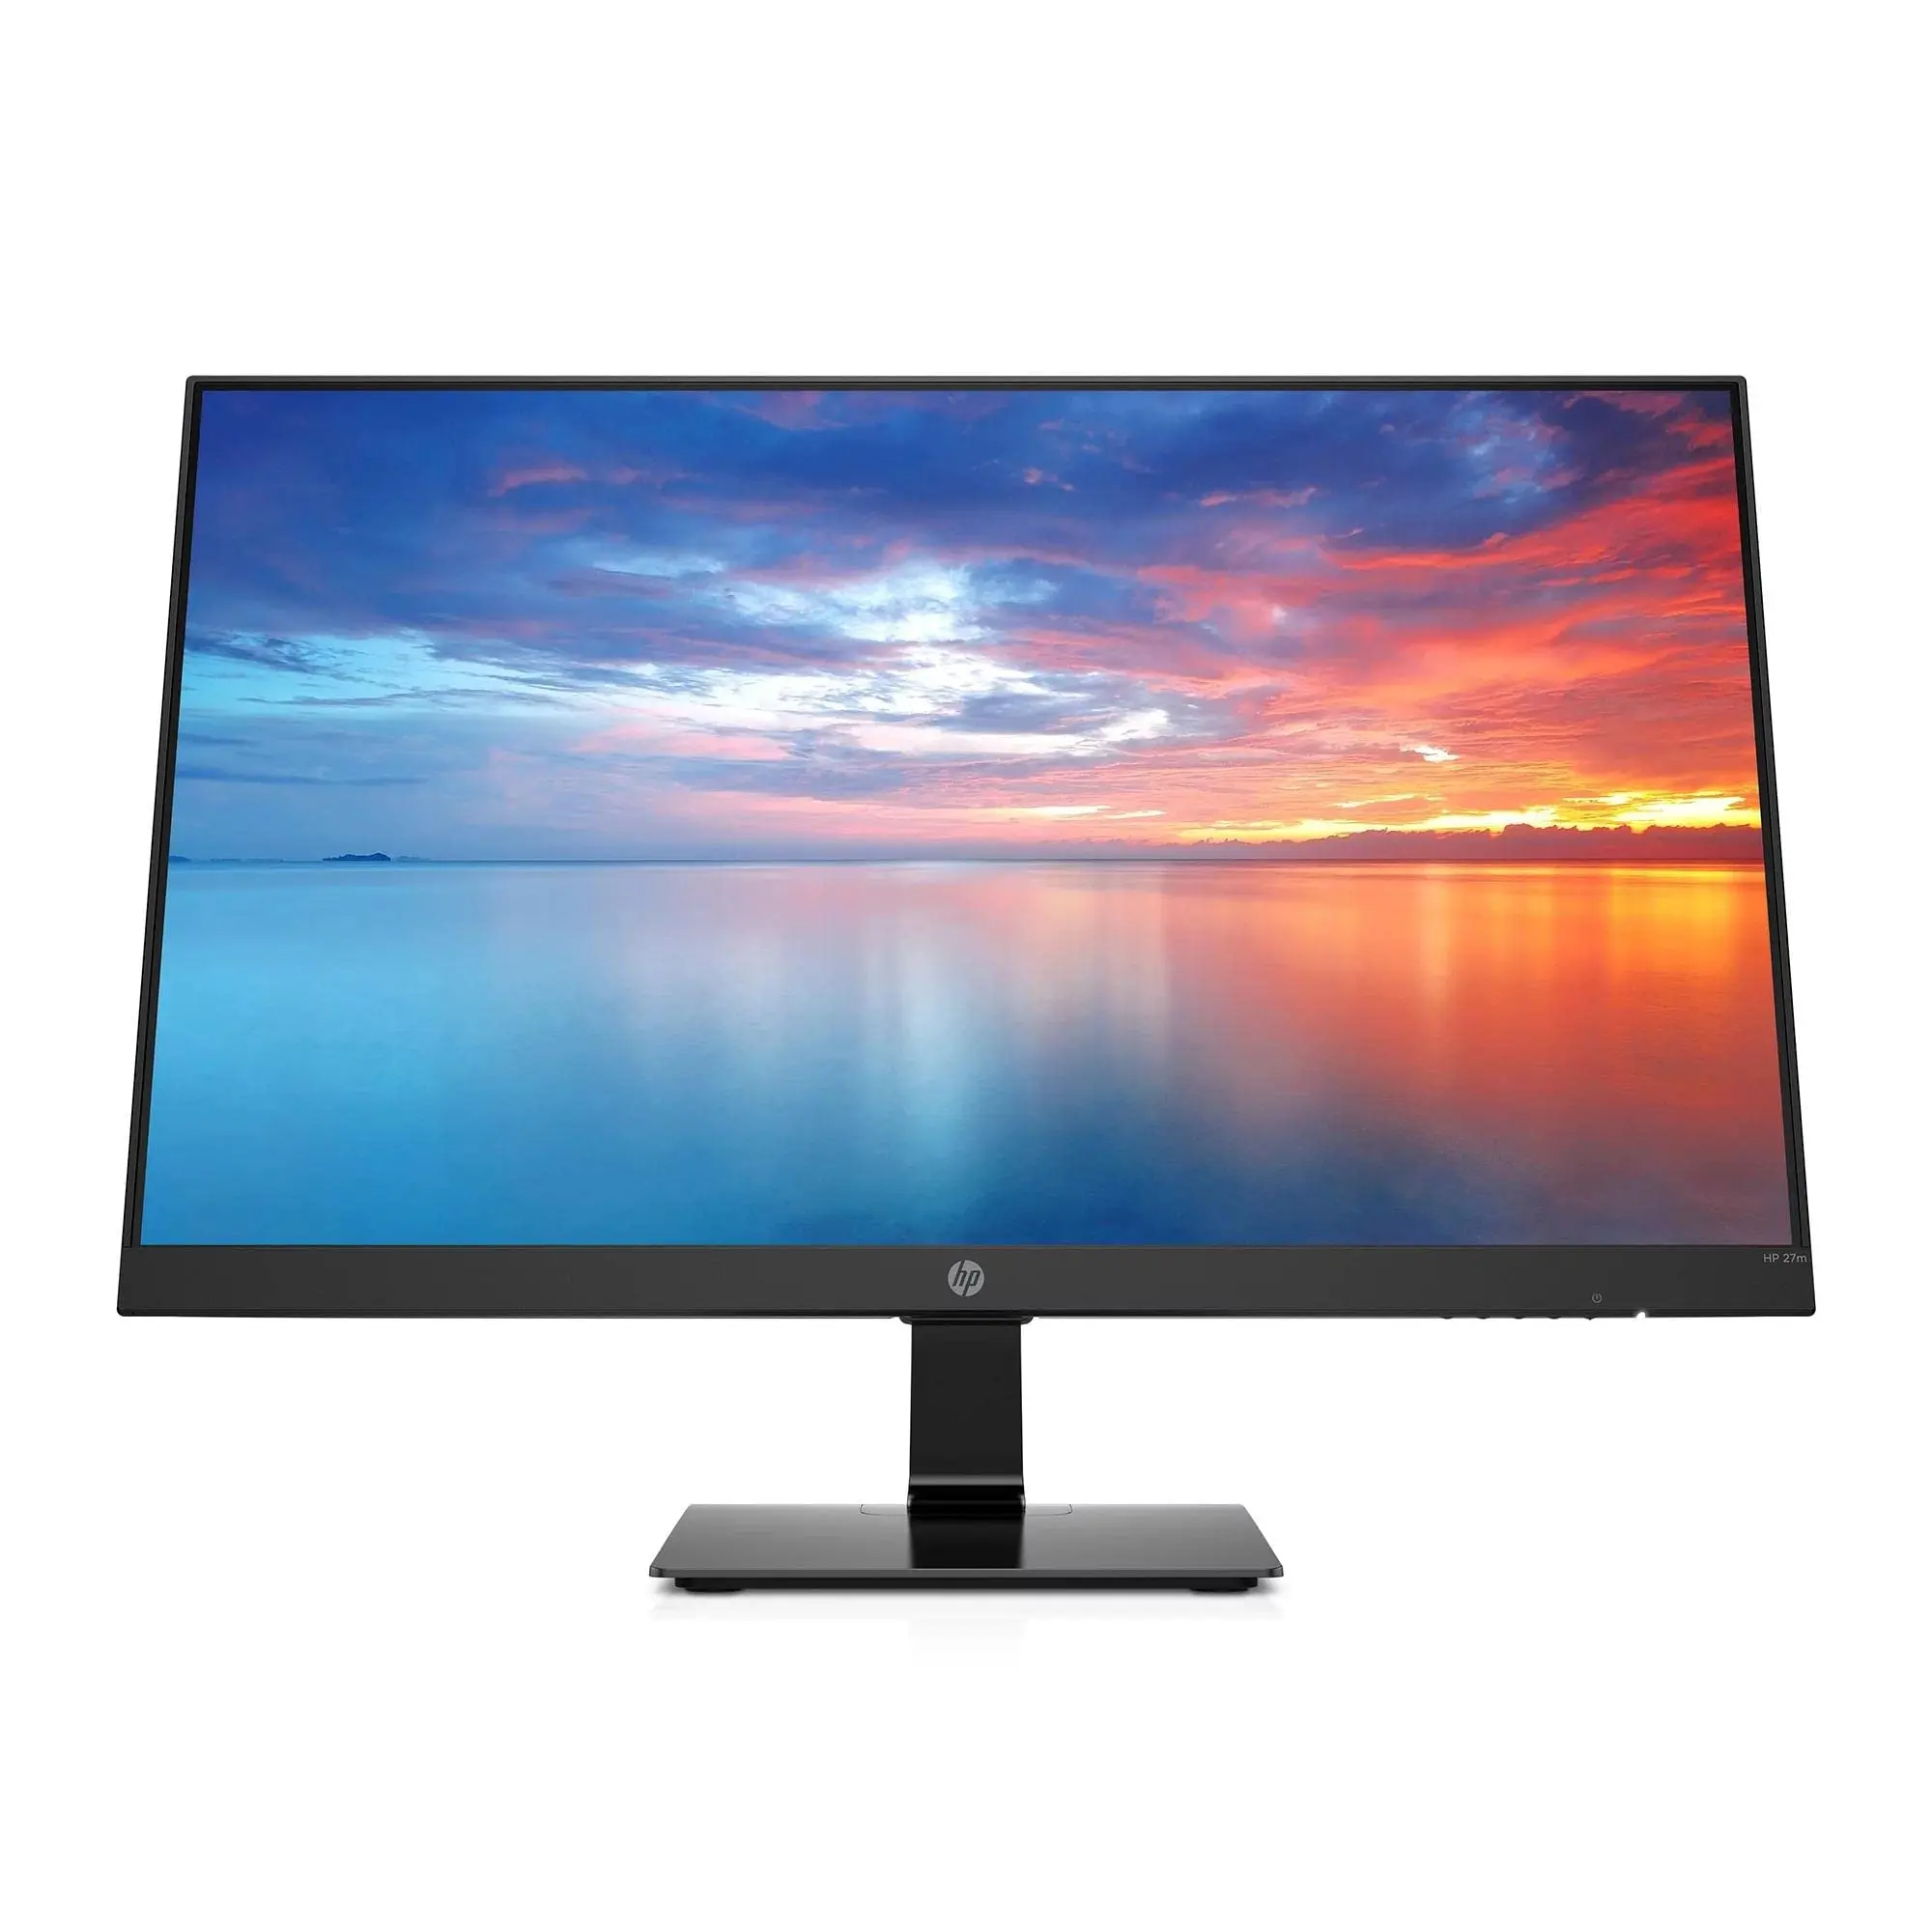 Optimizing hewlett packard computer monitors: a complete guide